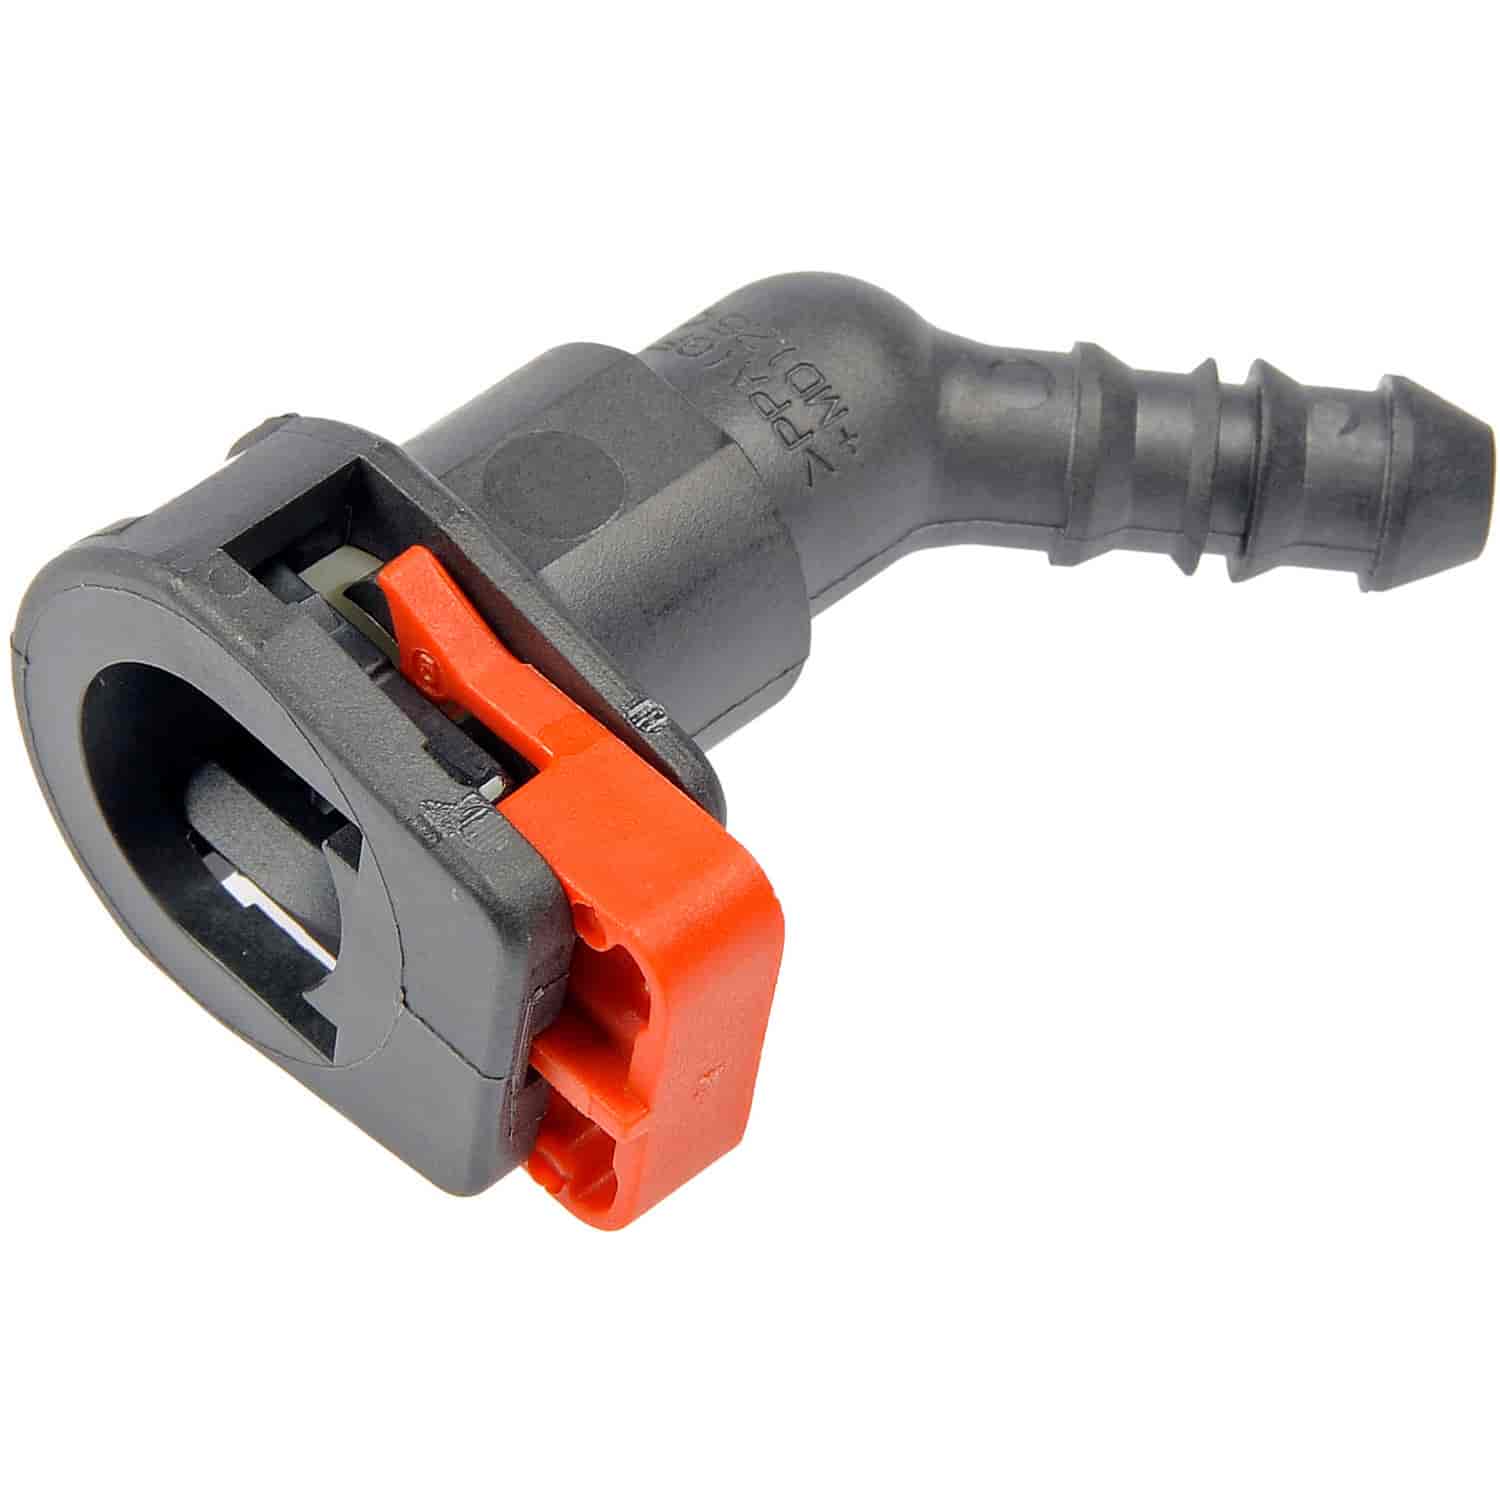 FUEL LINE CONNECTOR 3/8 IN. STEEL TO 5/16 IN. NYLON W/ 45 DEGREE BEND